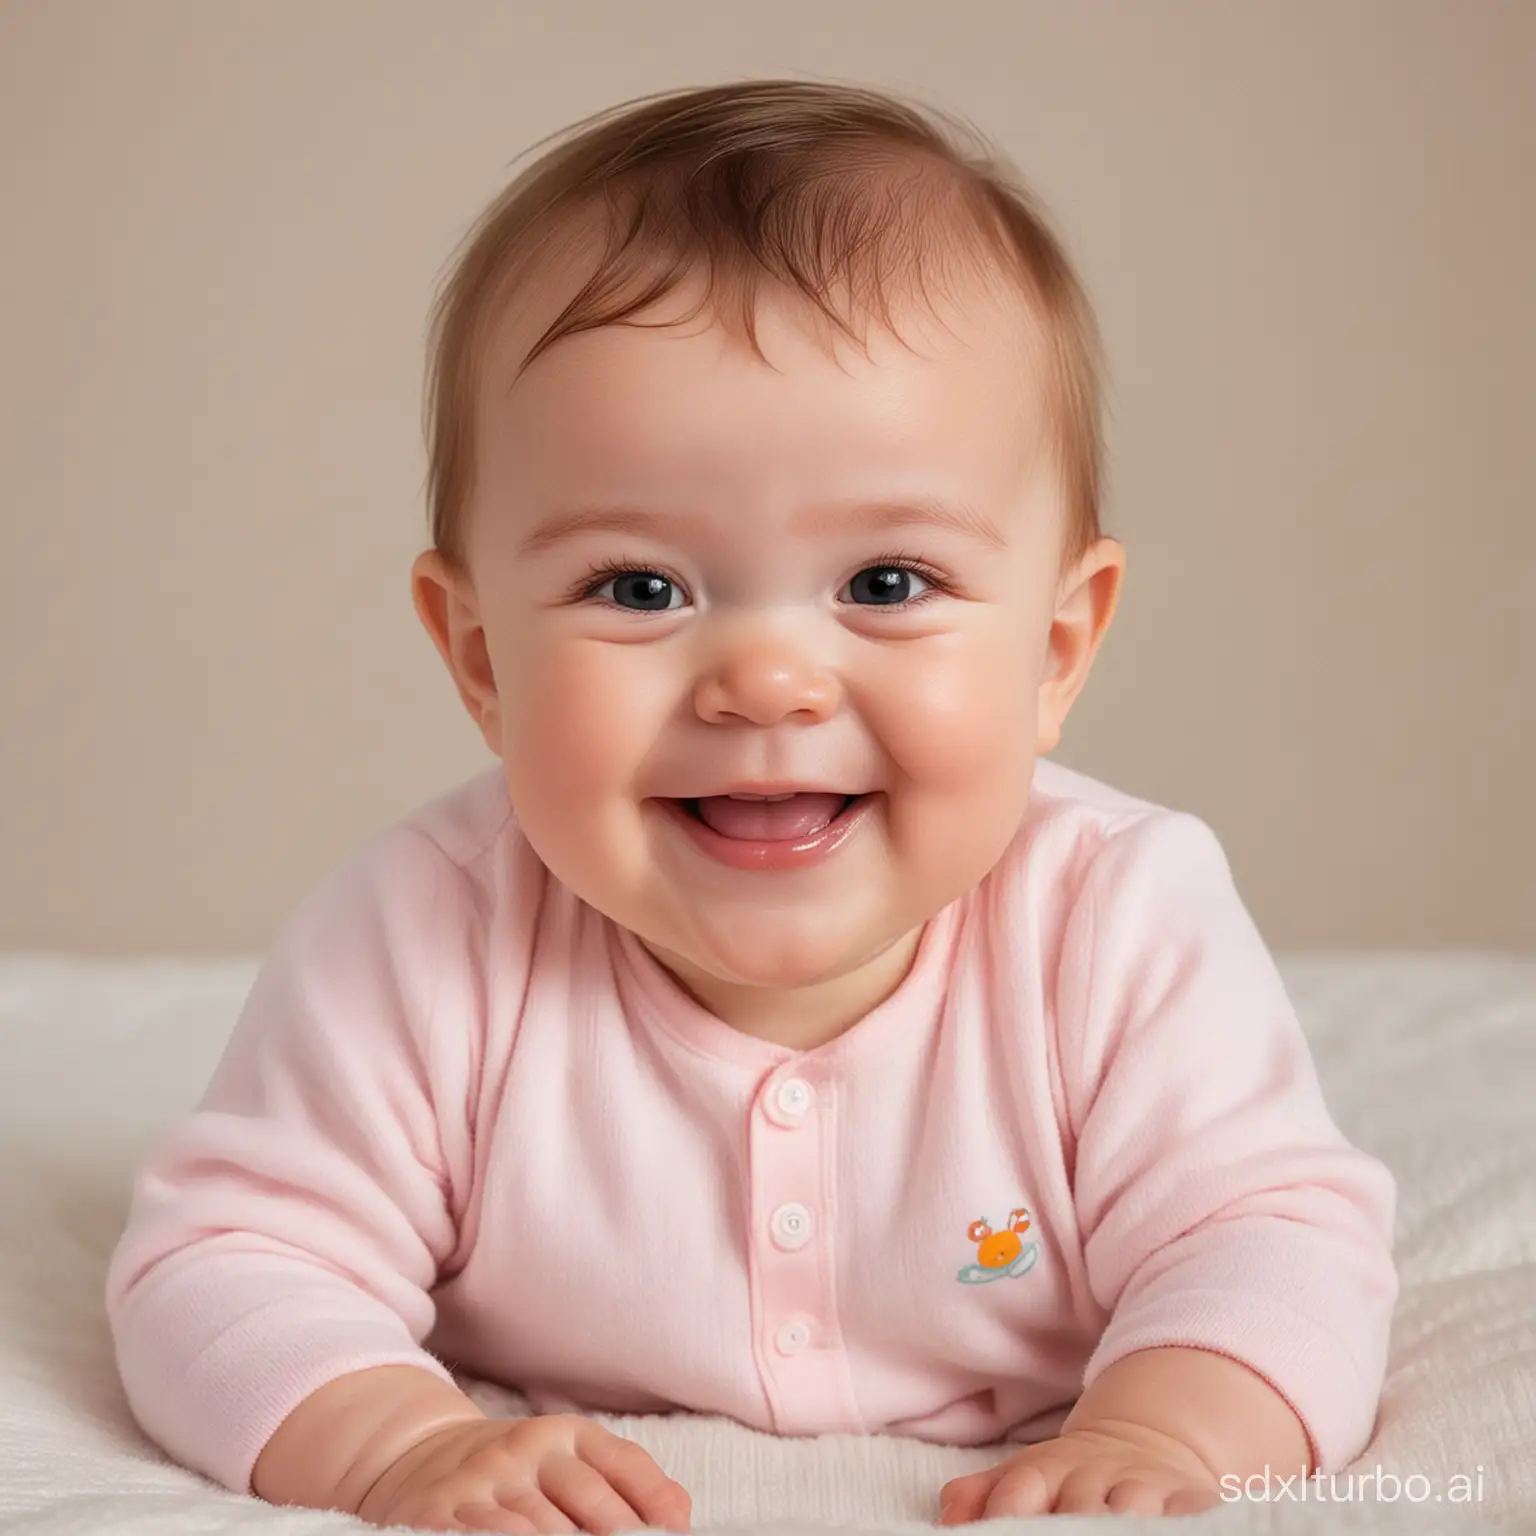 A rosy-cheeked happy baby is smiling sweetly, sitting